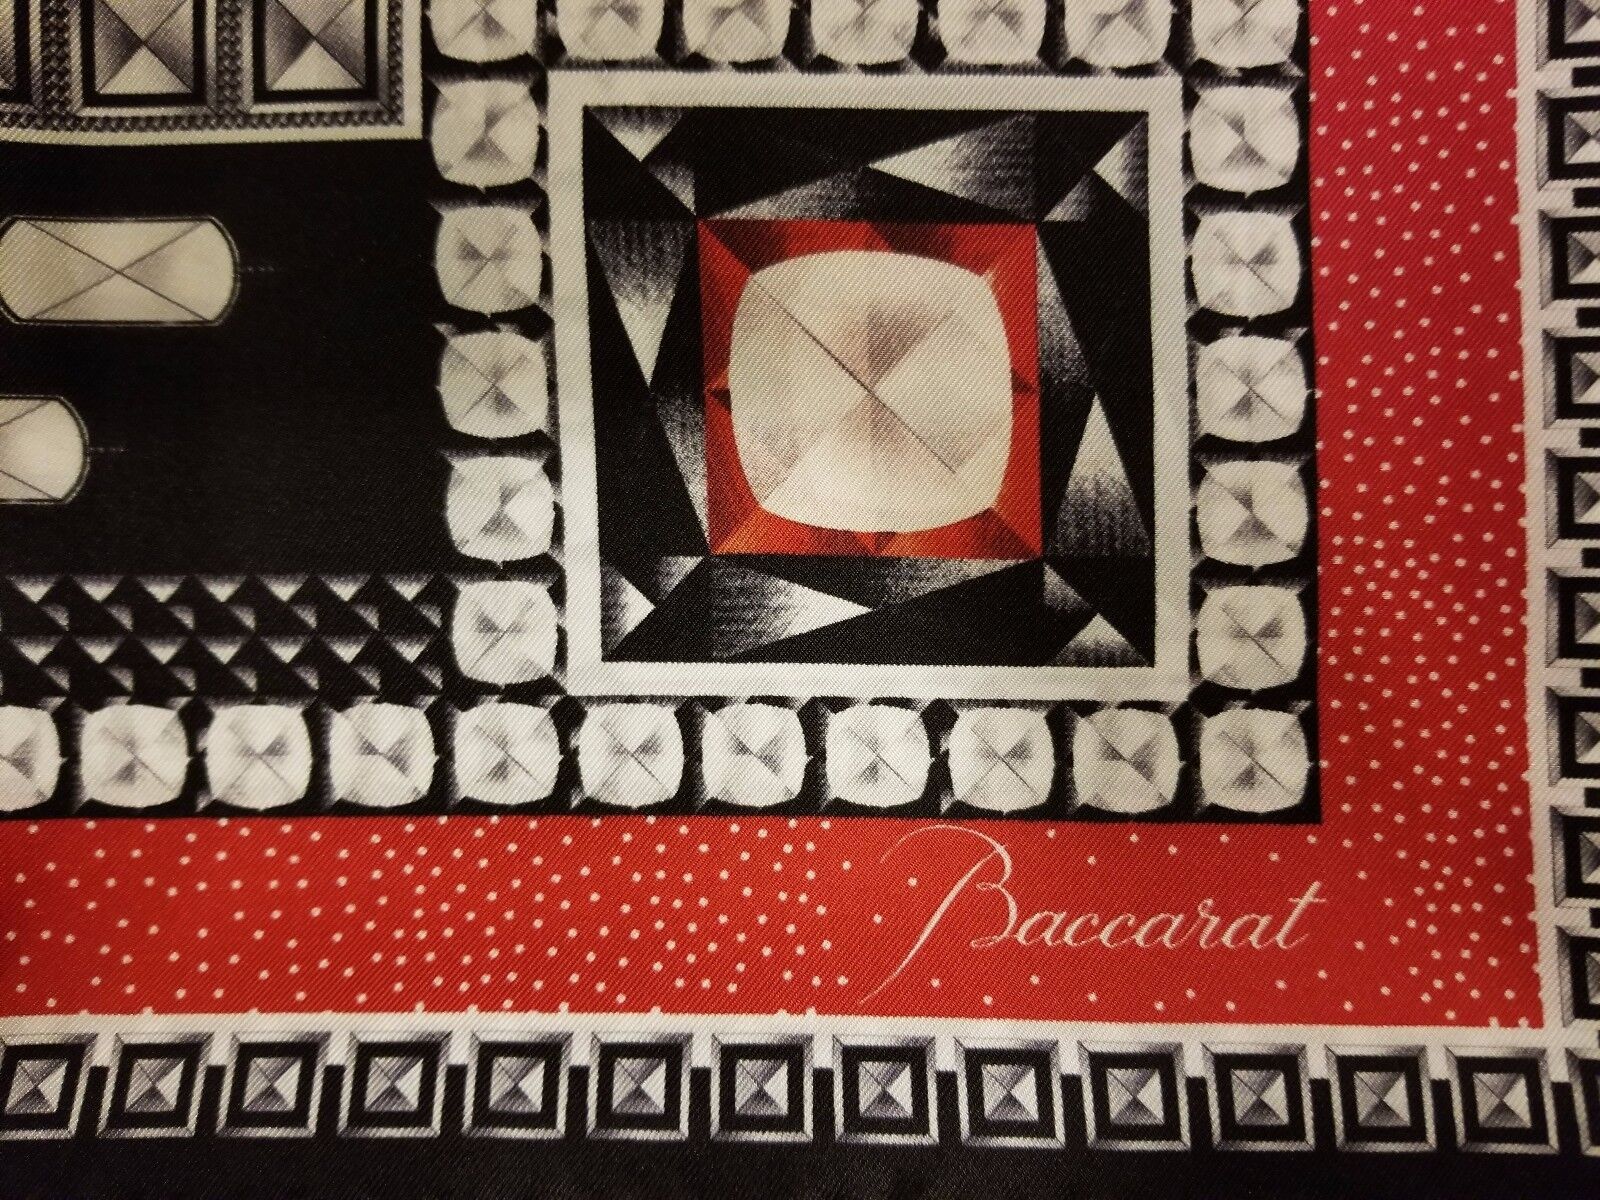 Primary image for Baccarat 100% Silk Scarf Body Shawl Red Black Graphic 55" Louxor 2809047 NEW BOX